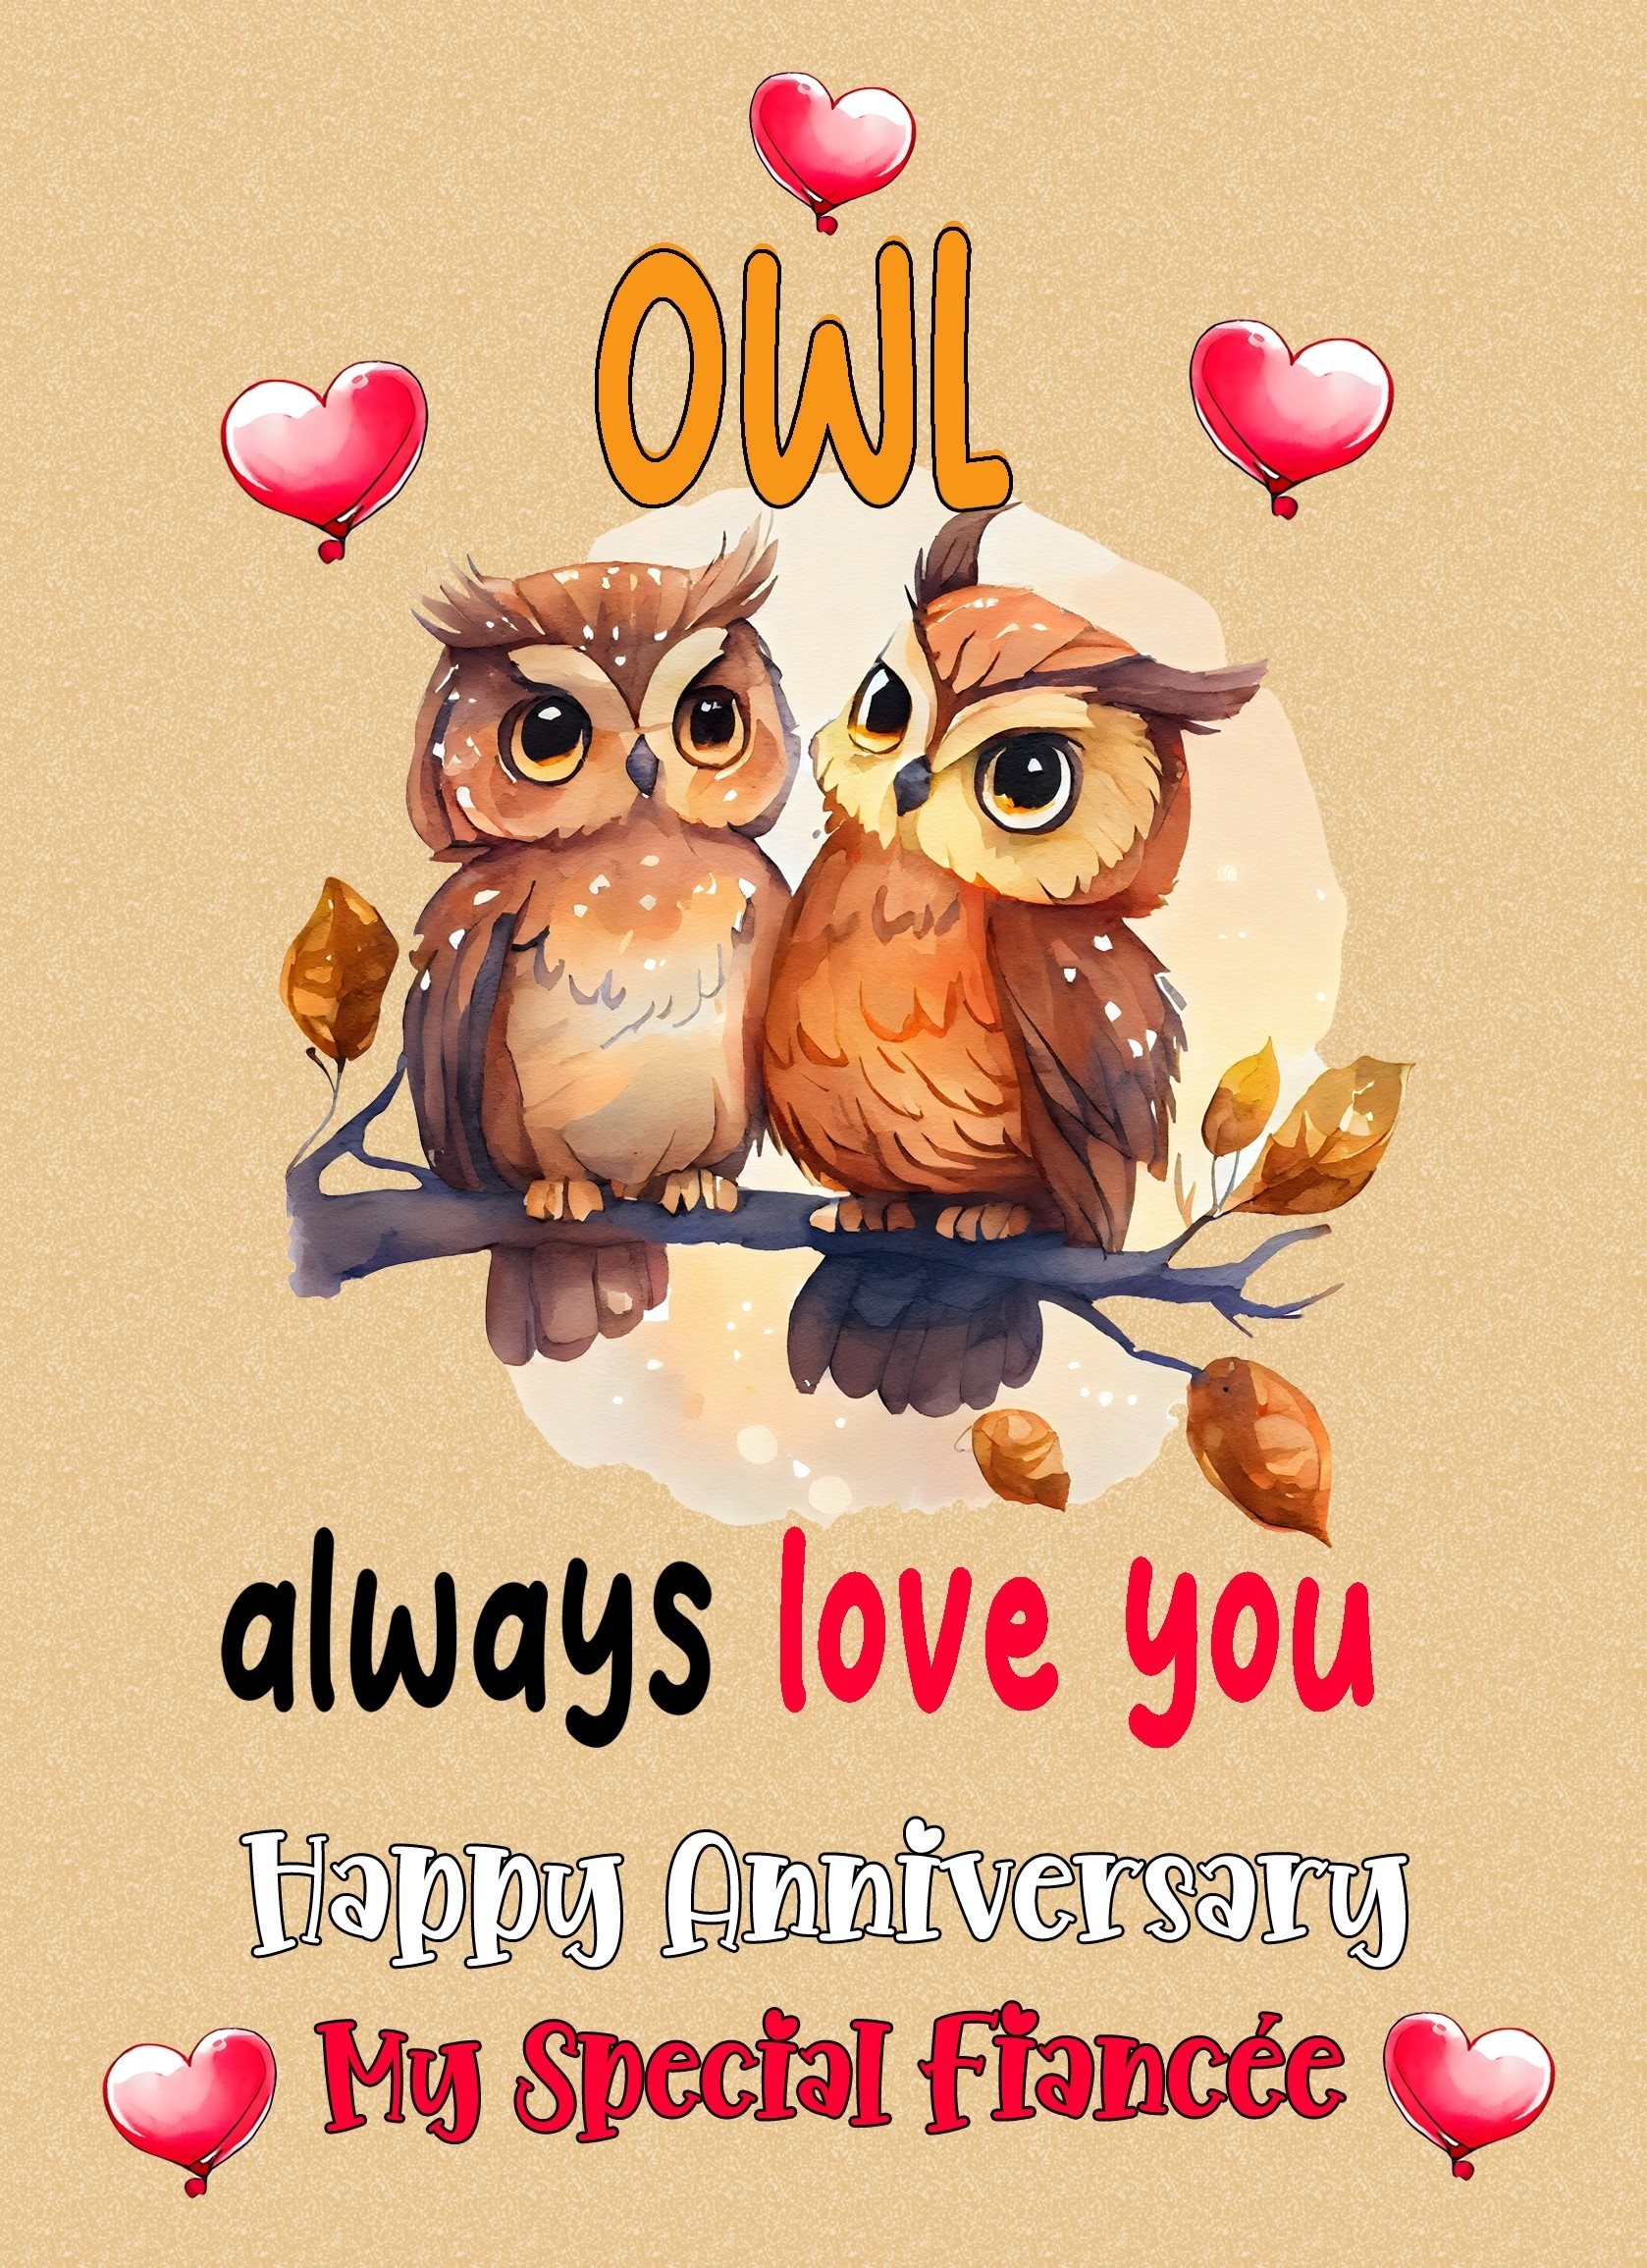 Funny Pun Romantic Anniversary Card for Fiancee (Owl Always Love You)